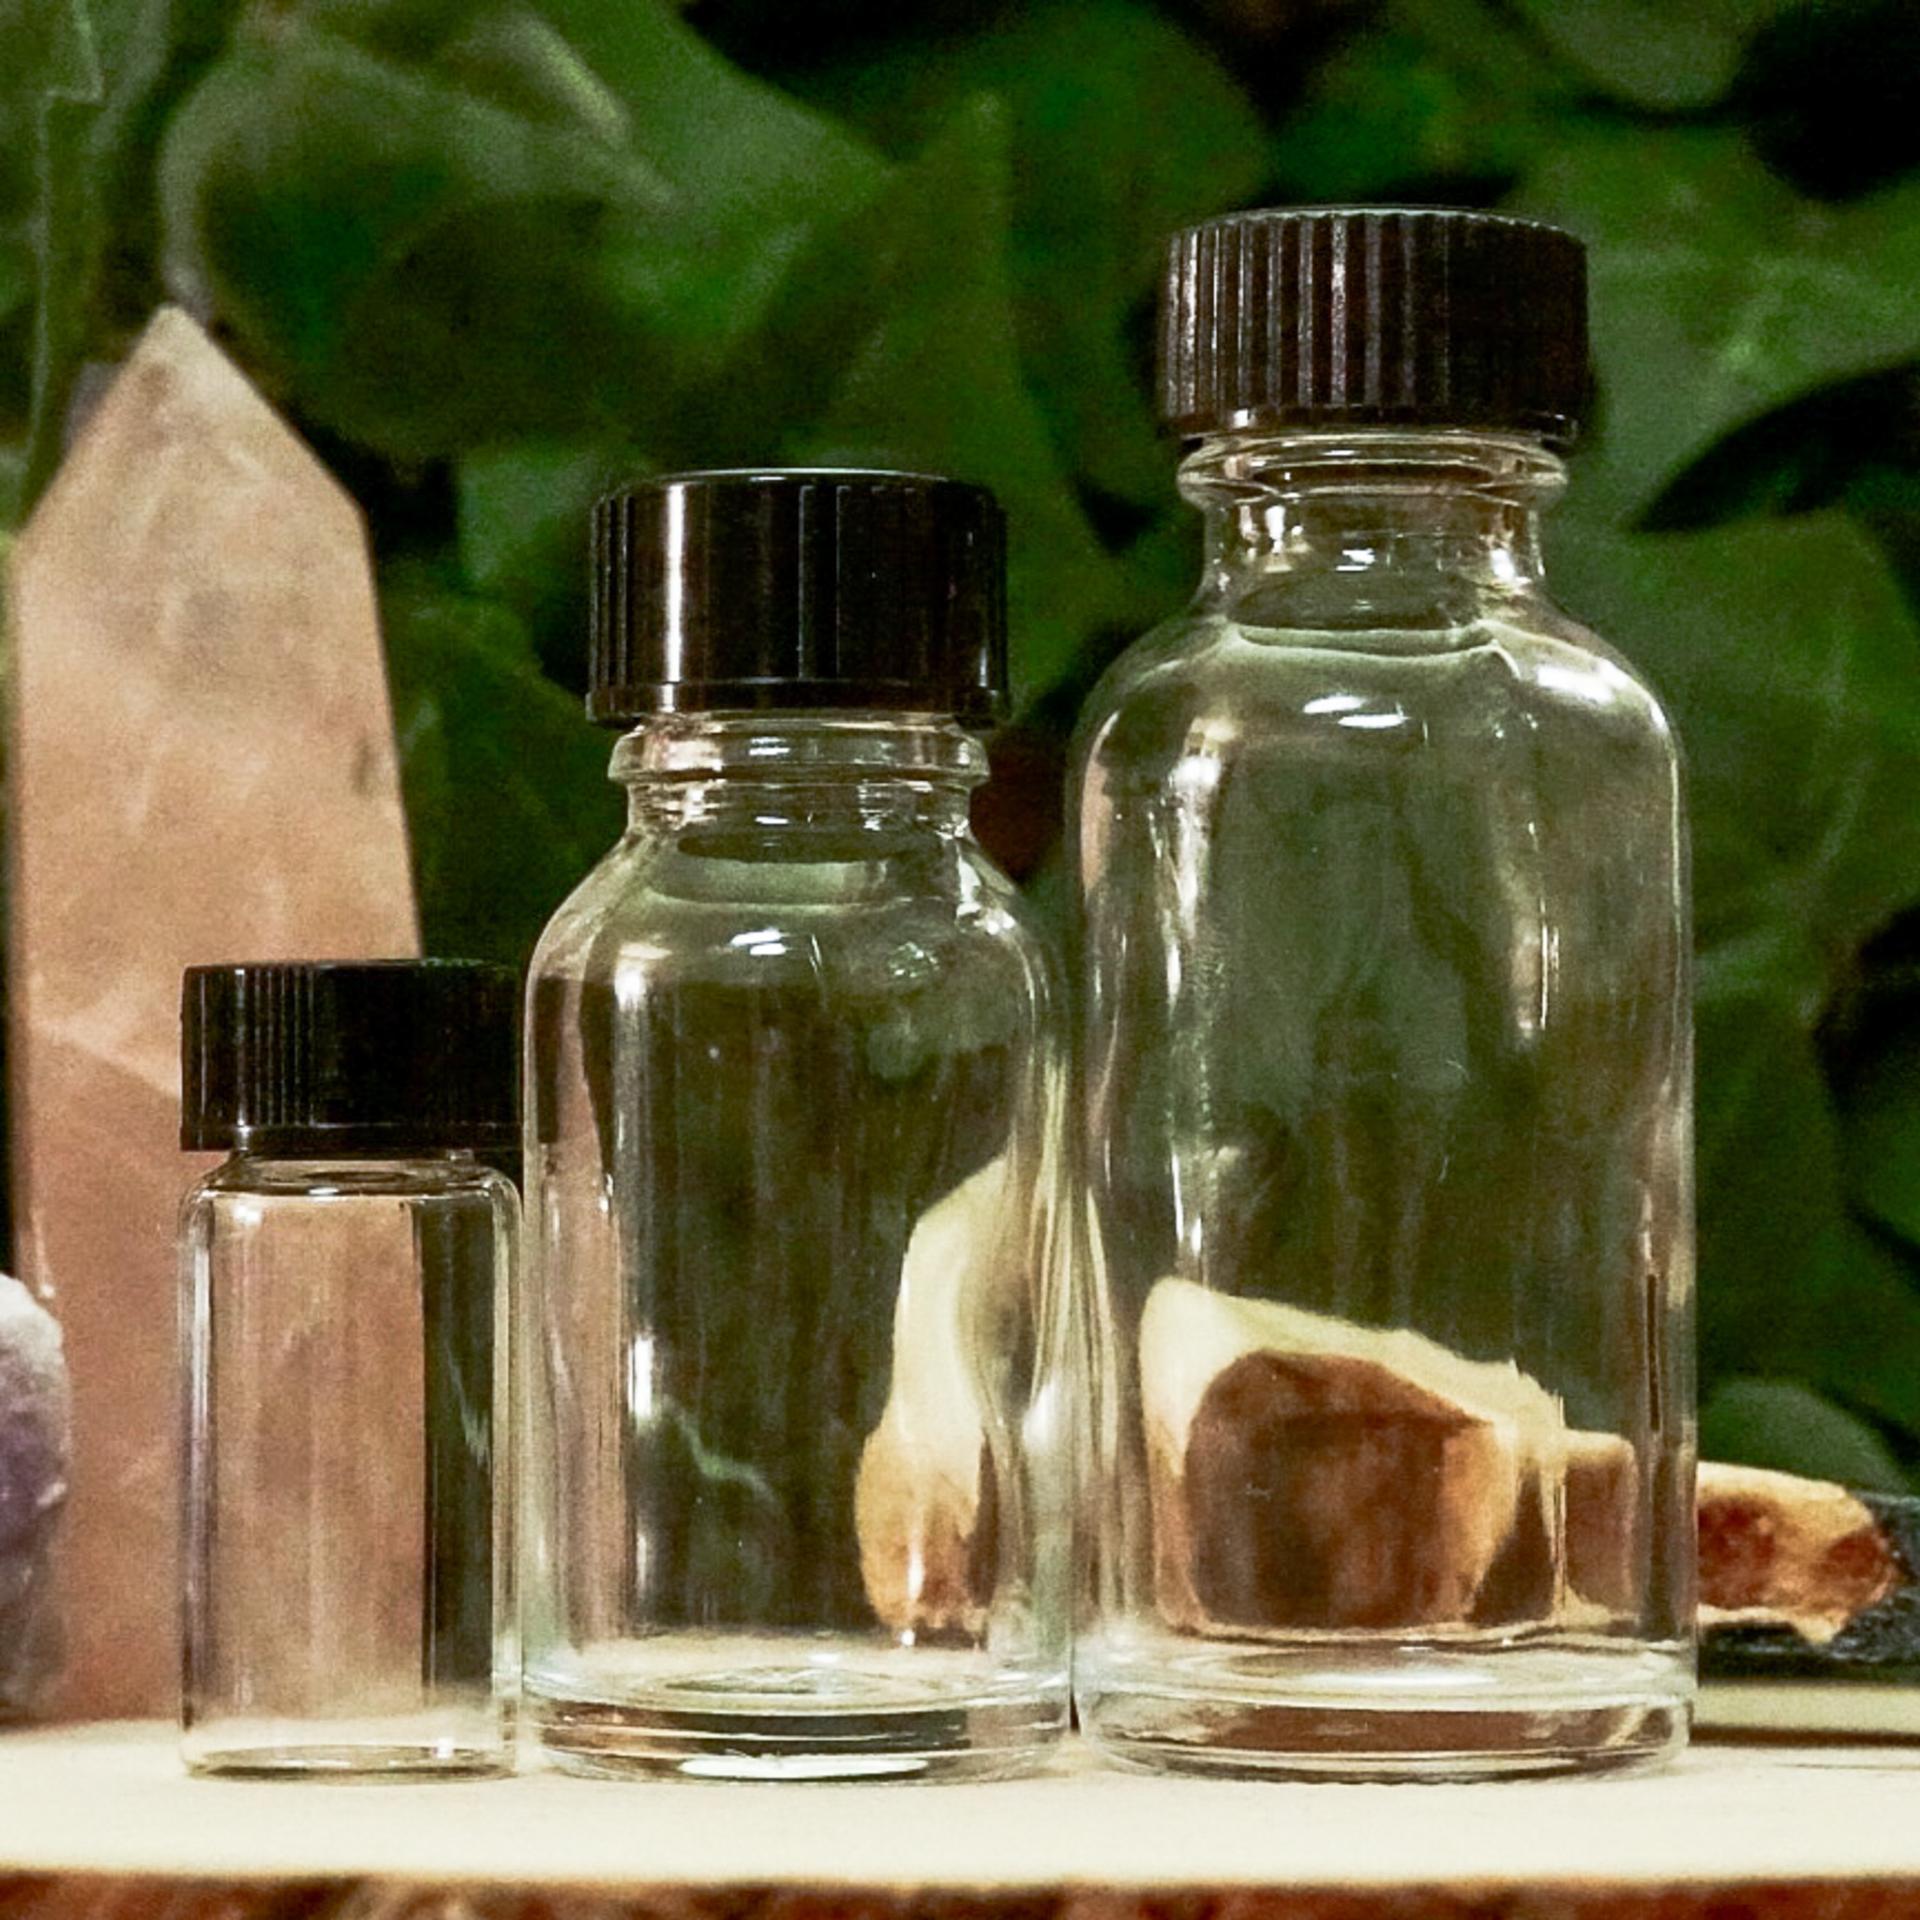 FOUR THIEVES™ FireFoxAlchemy Ritual Oil for Protection, Banishing, and Healing